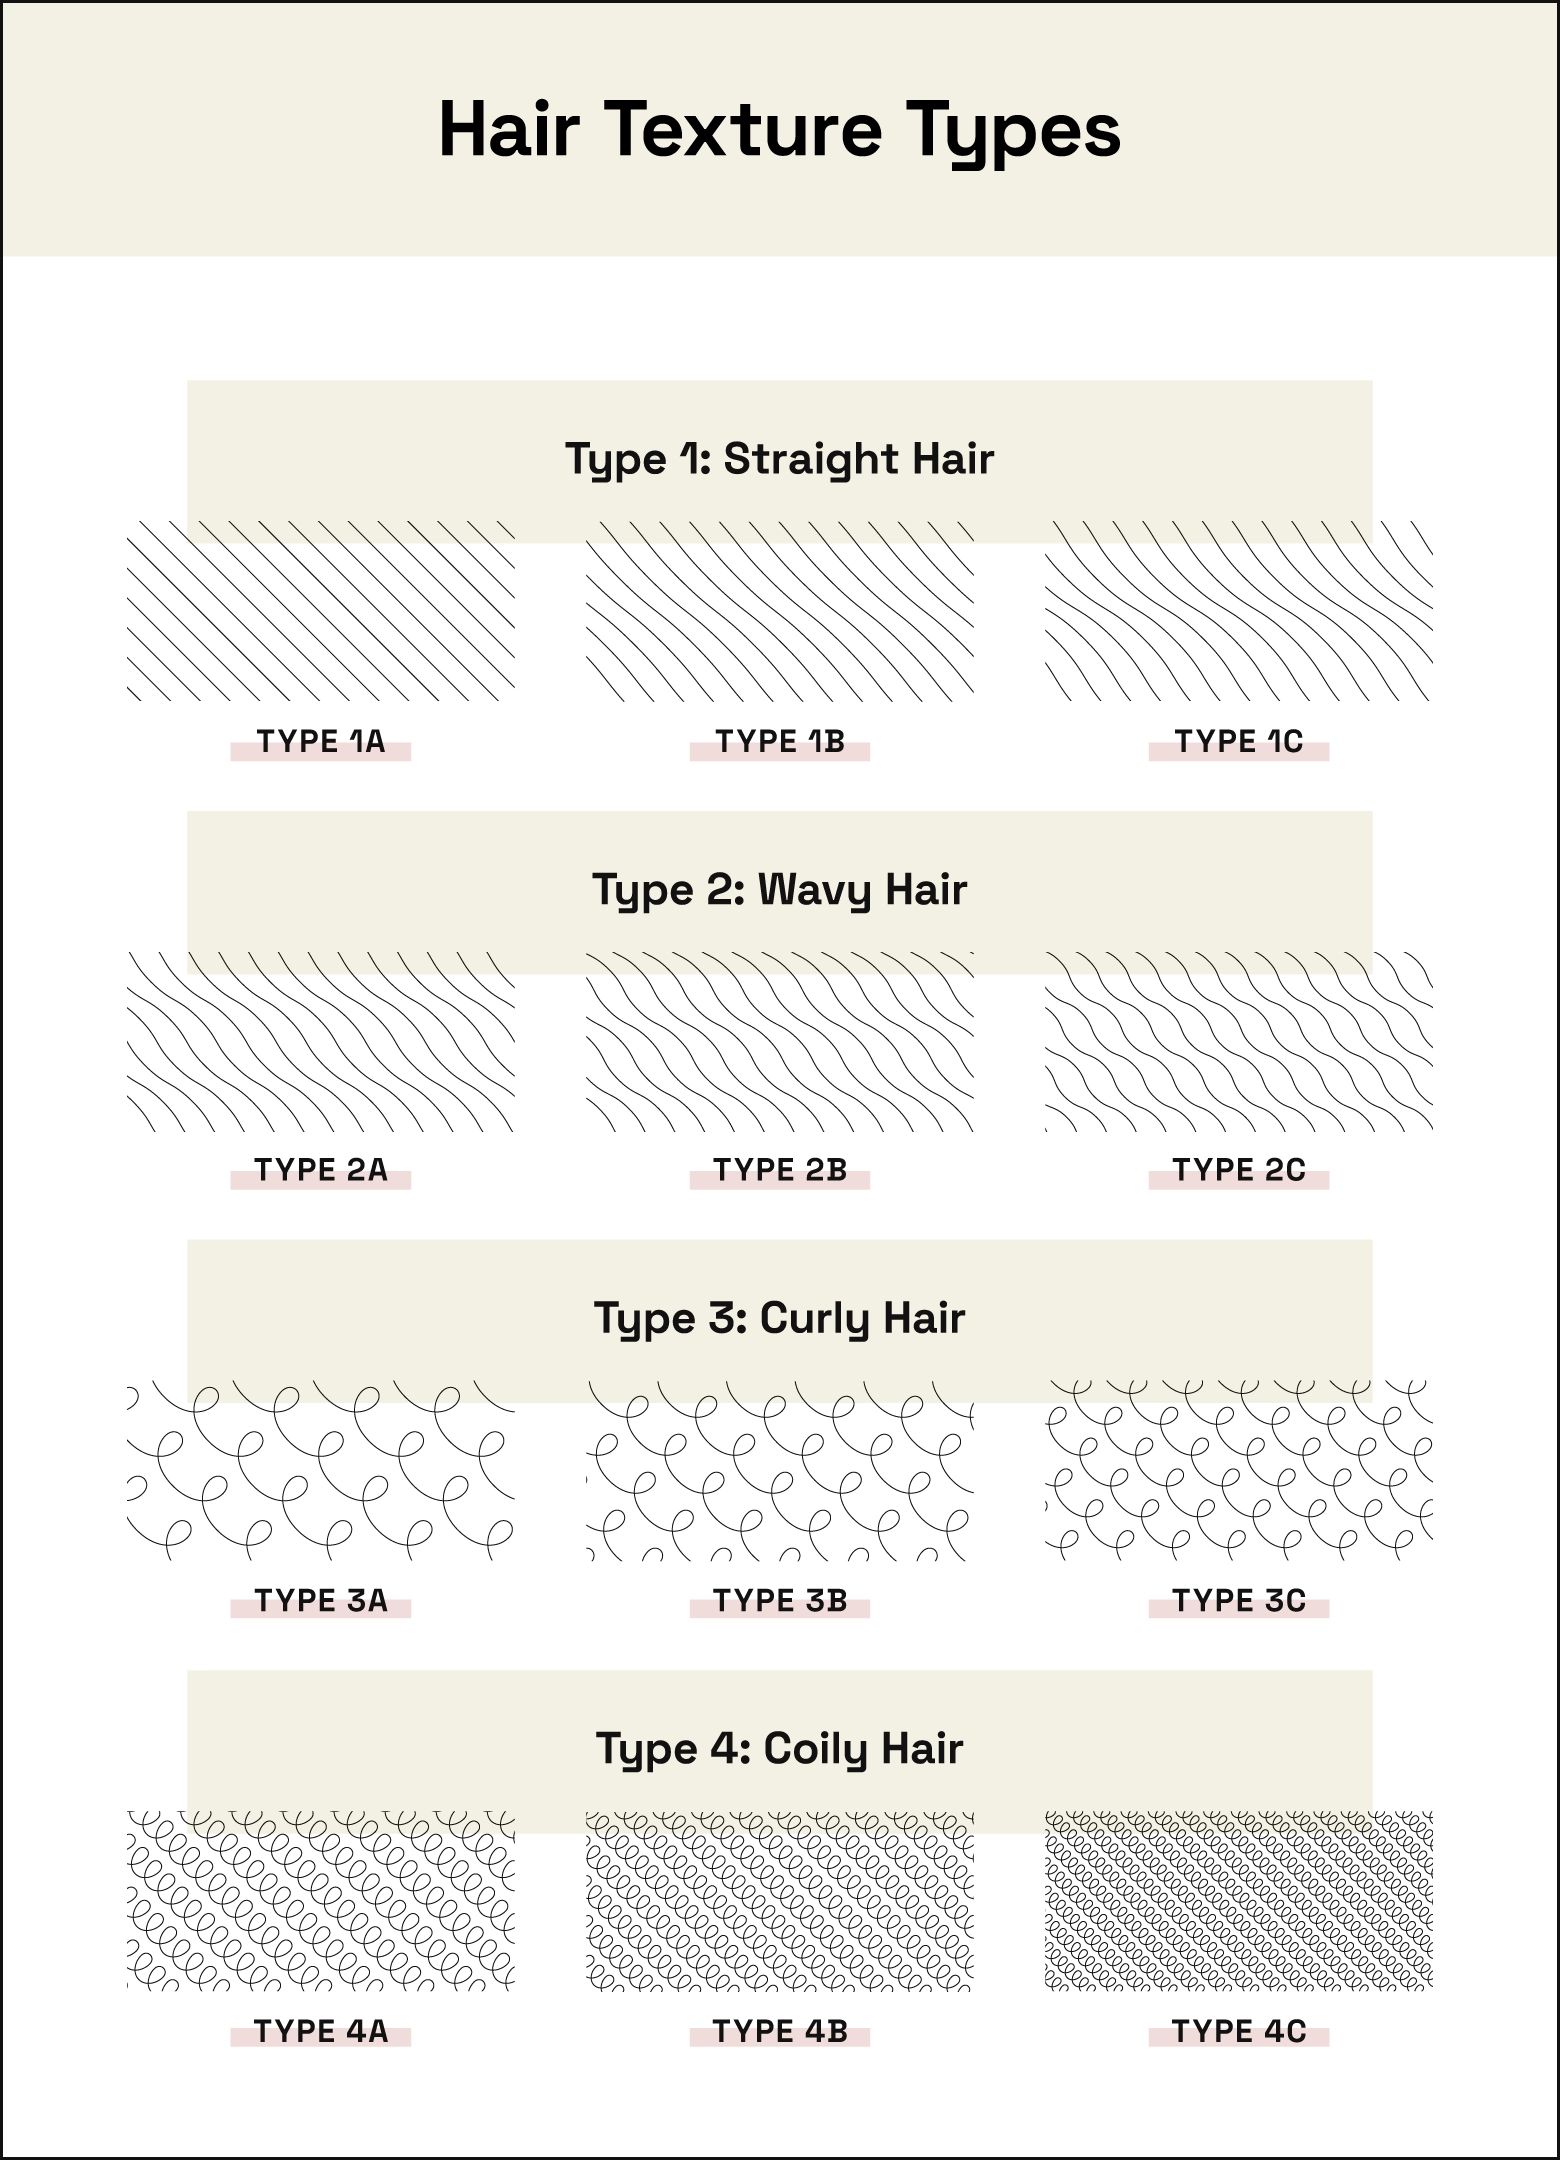 Image shows examples of what each hair texture type looks like.